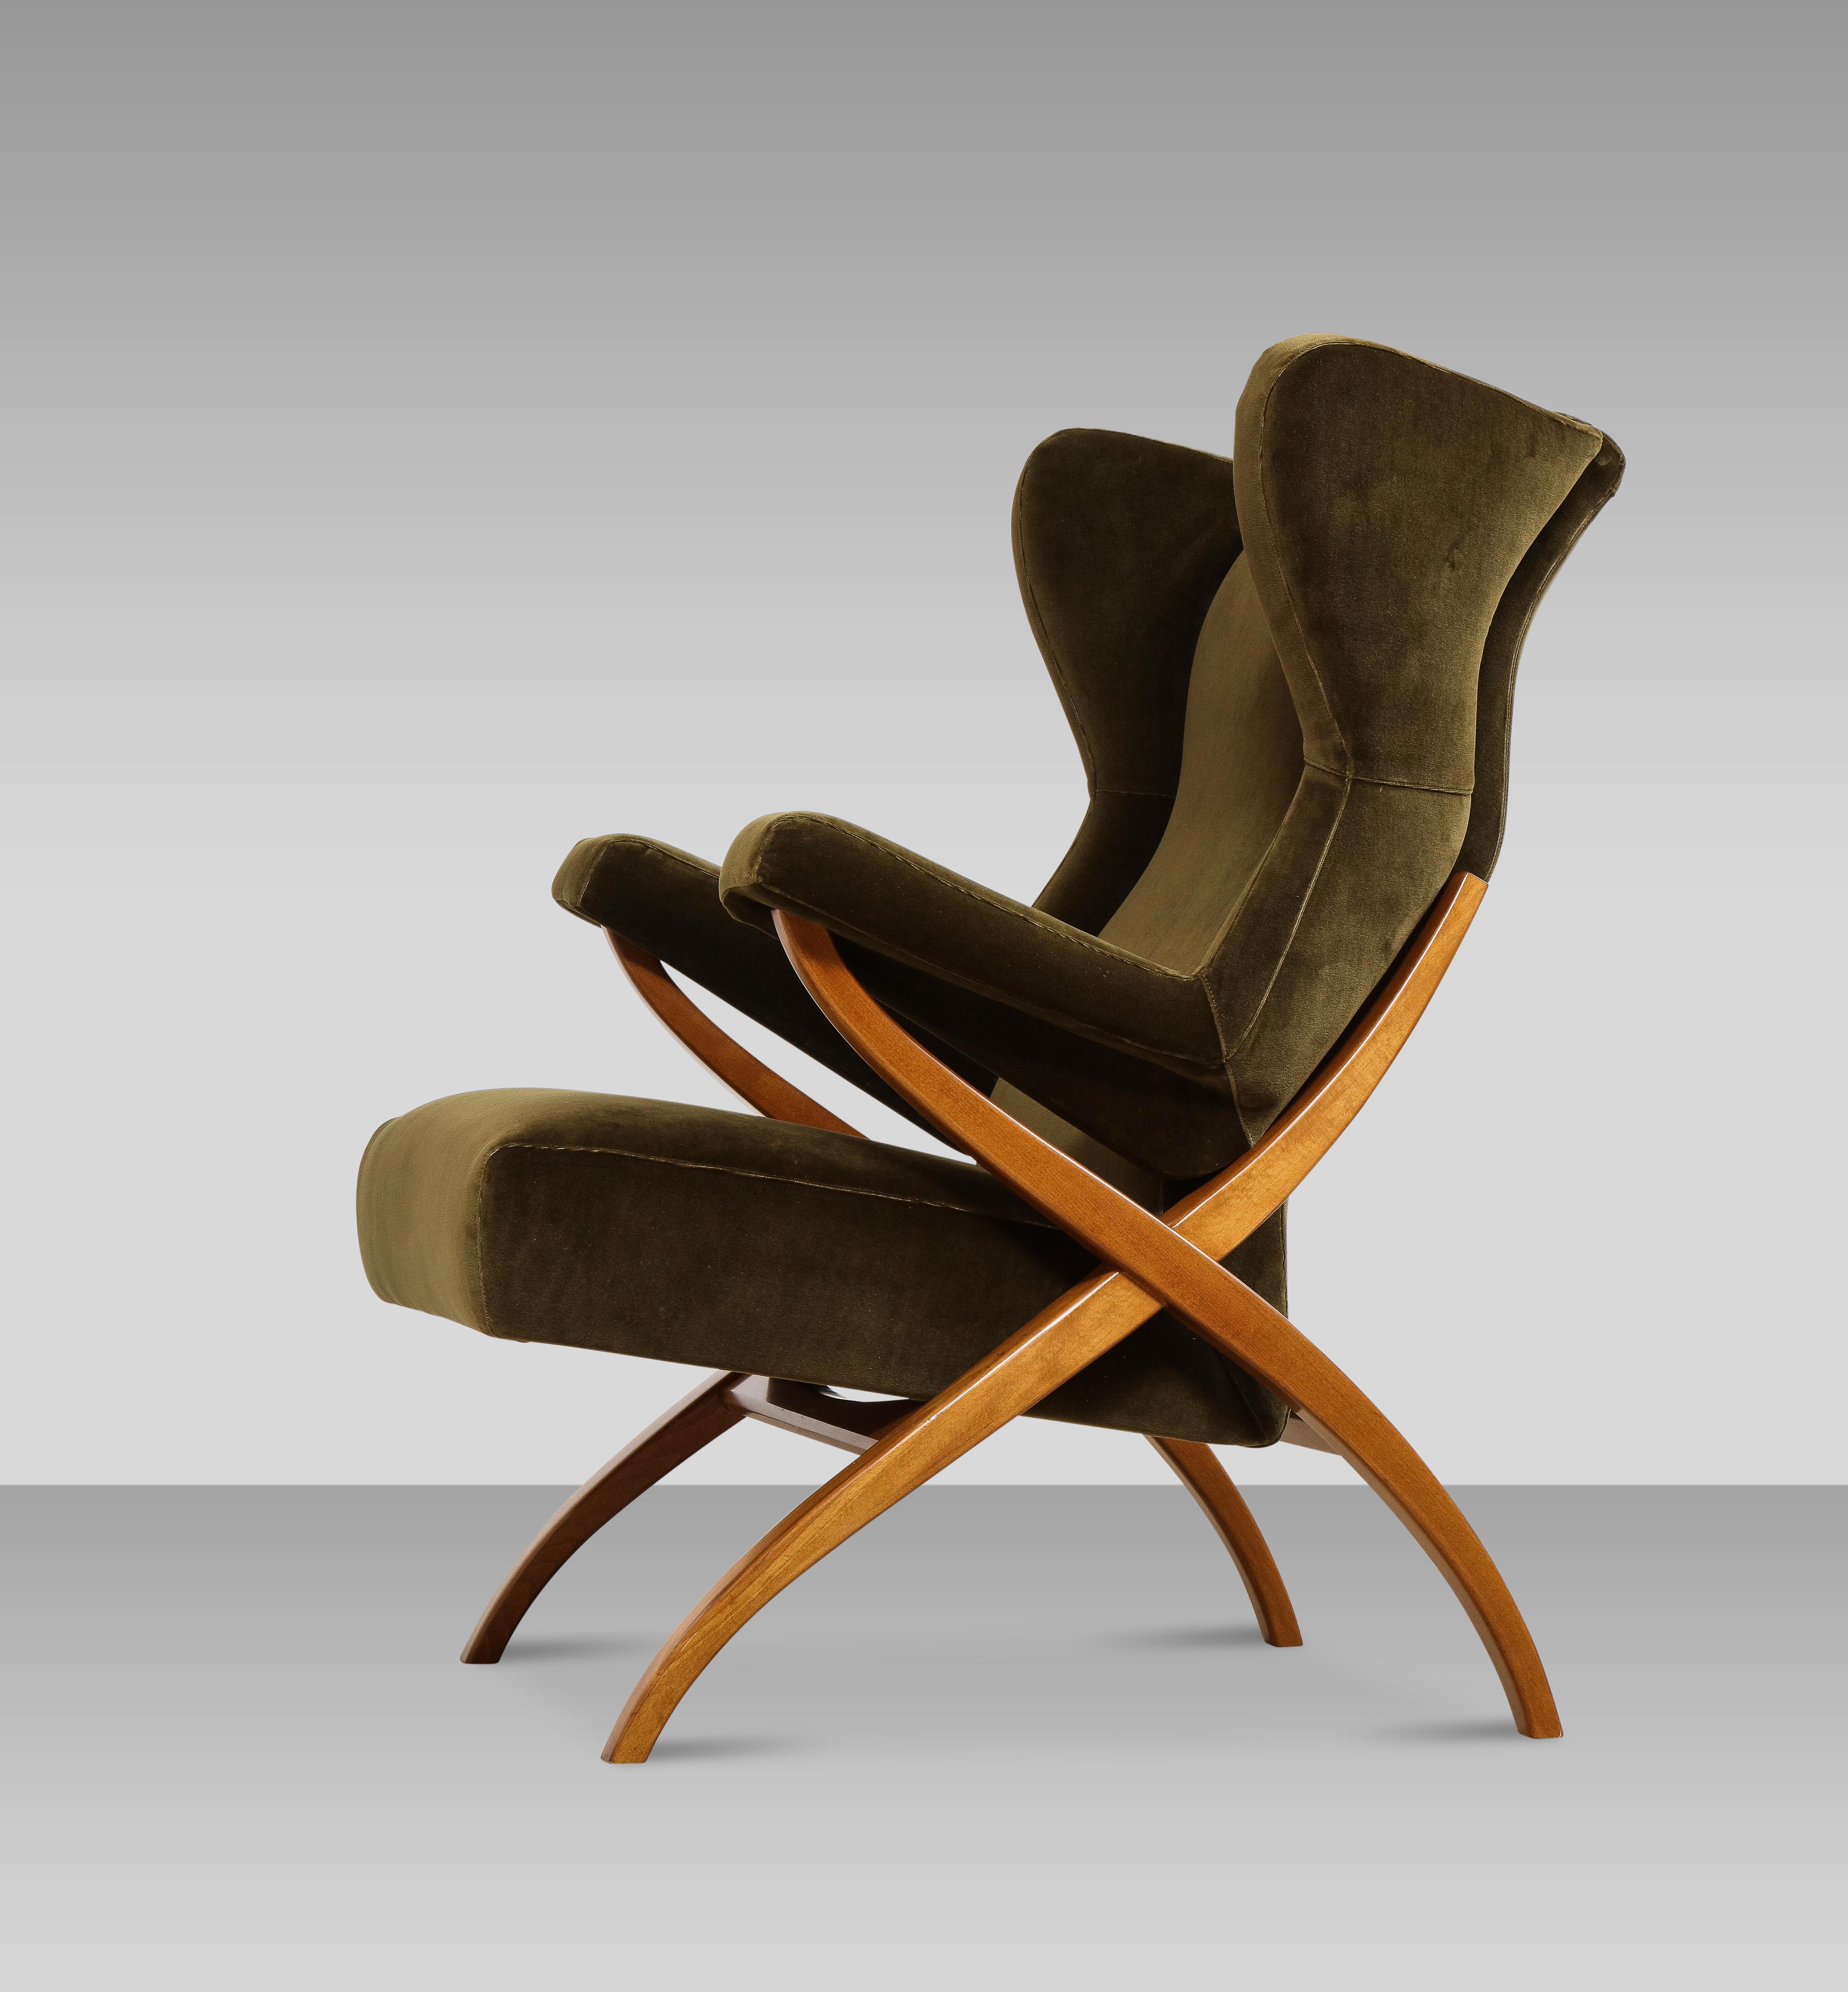 Fiorenza armchair by Franco Albini for Arflex. Sculptural armchair, variant of Albini’s iconic Fiorenza chair. Wood frame and beautifully shaped seat and back rest. Published: Repertorio del Design, G. Gramignia, Pg. 28.




   